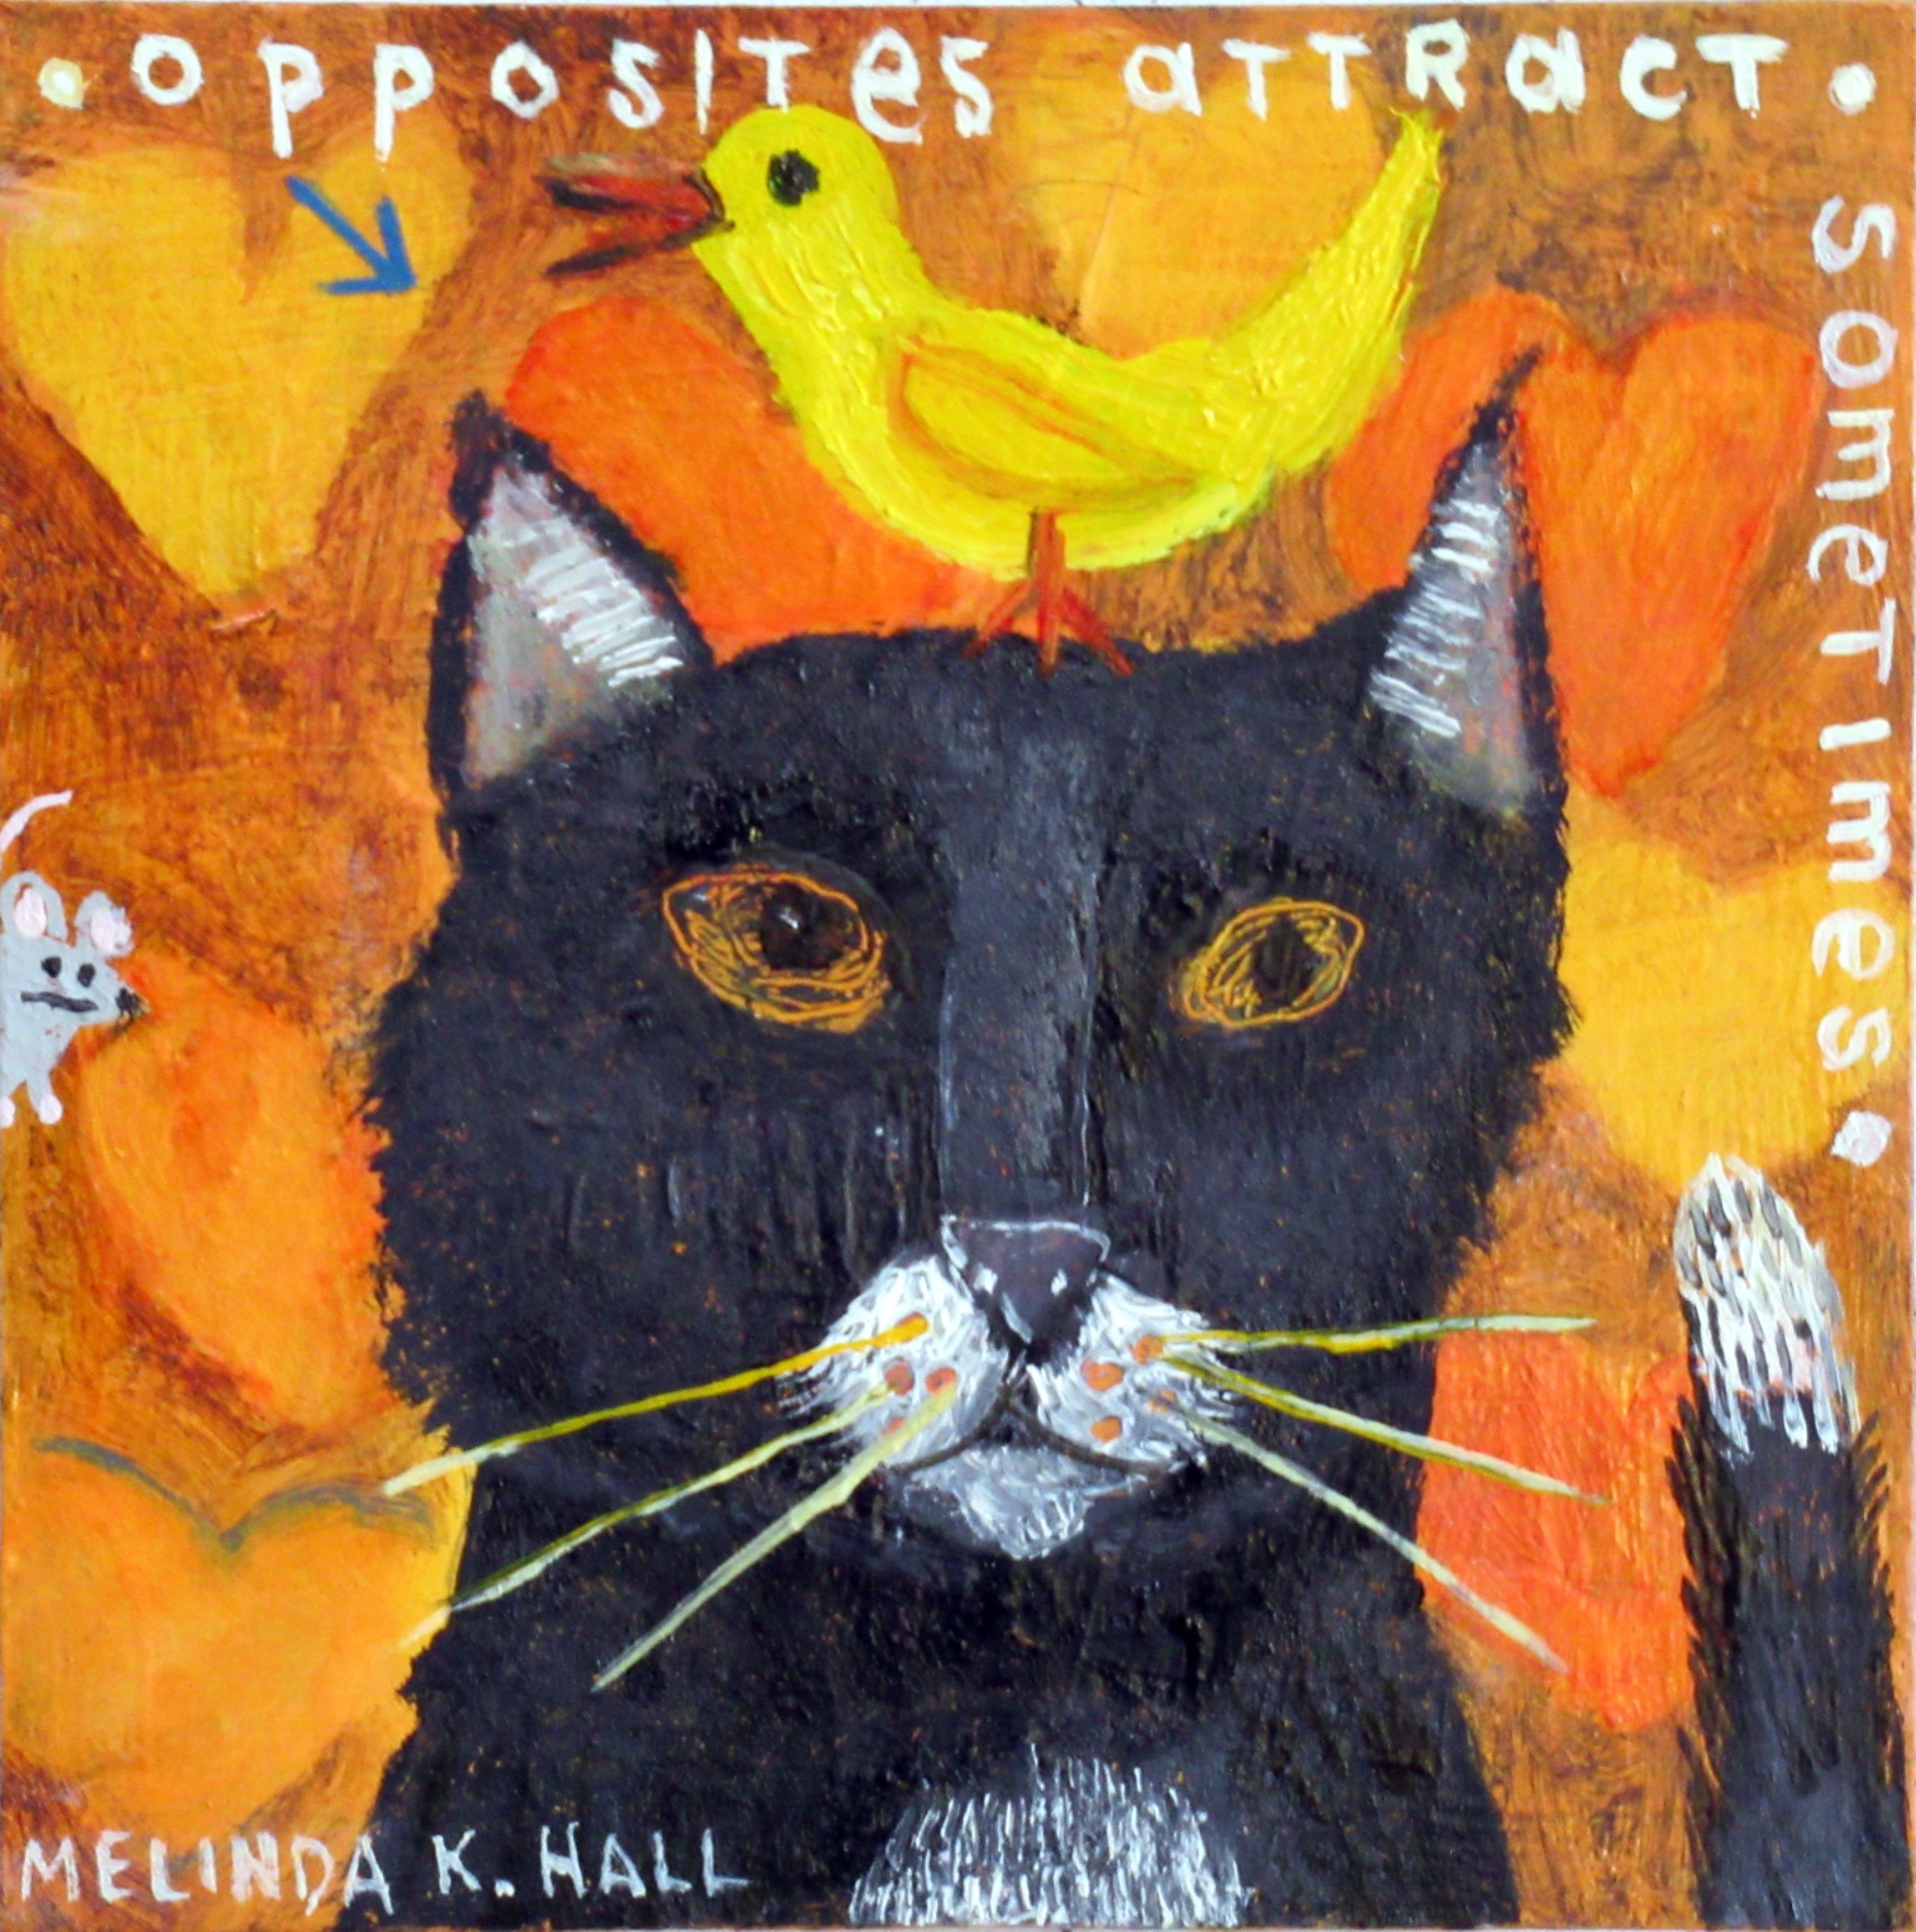 Opposites Attract, Sometimes by Melinda K. Hall